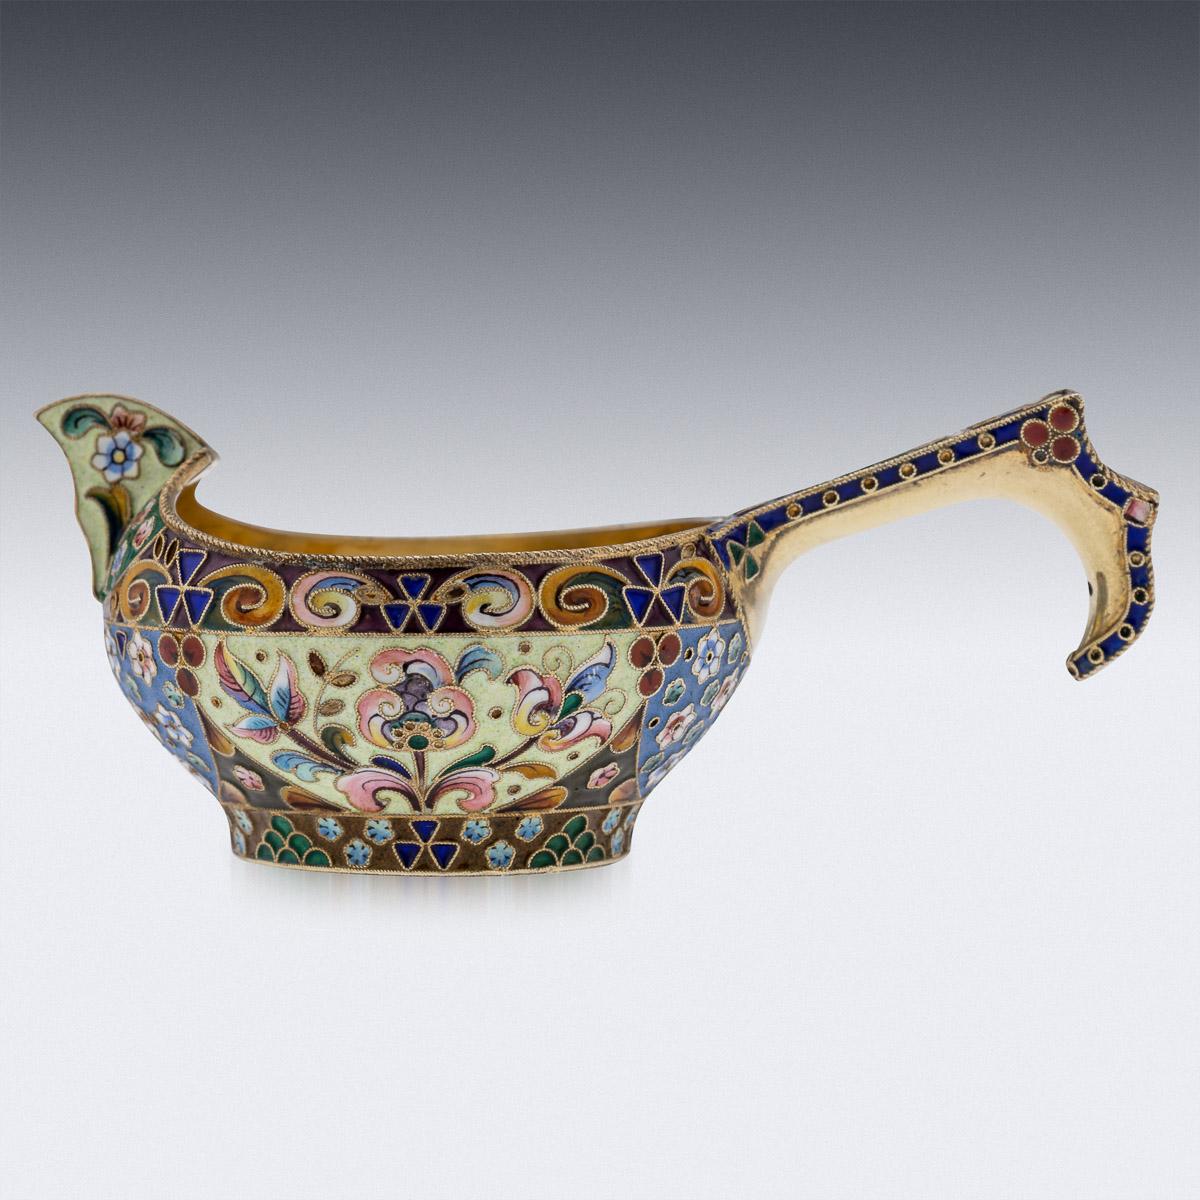 20th century Imperial Russian silver & shaded cloisonne' enamel Kovsh, of traditional oval form, with raised prow and hook handle, the body beautifully decorated with various shaded polychrome cloisonne' enamel with stylised scrolling foliage and